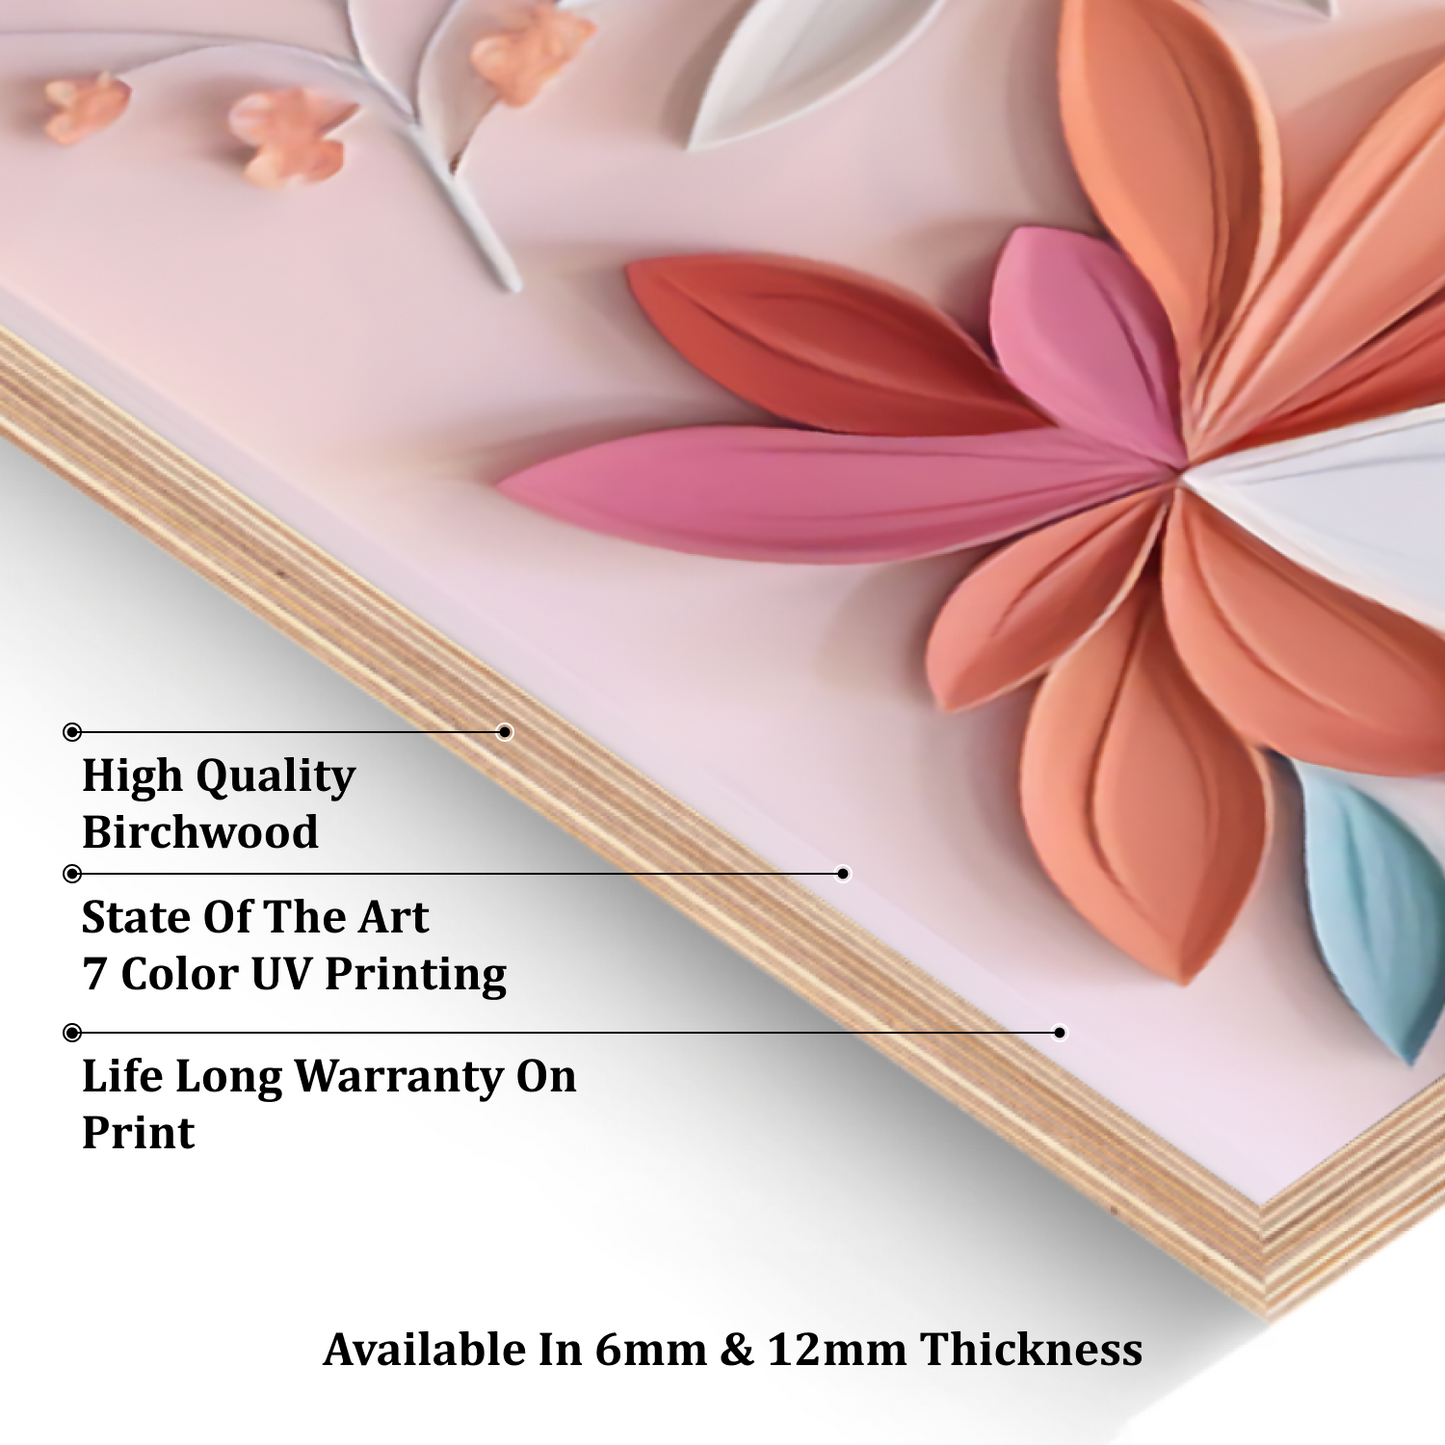 3D Colorful Flowers Luxury Wall Art Painting